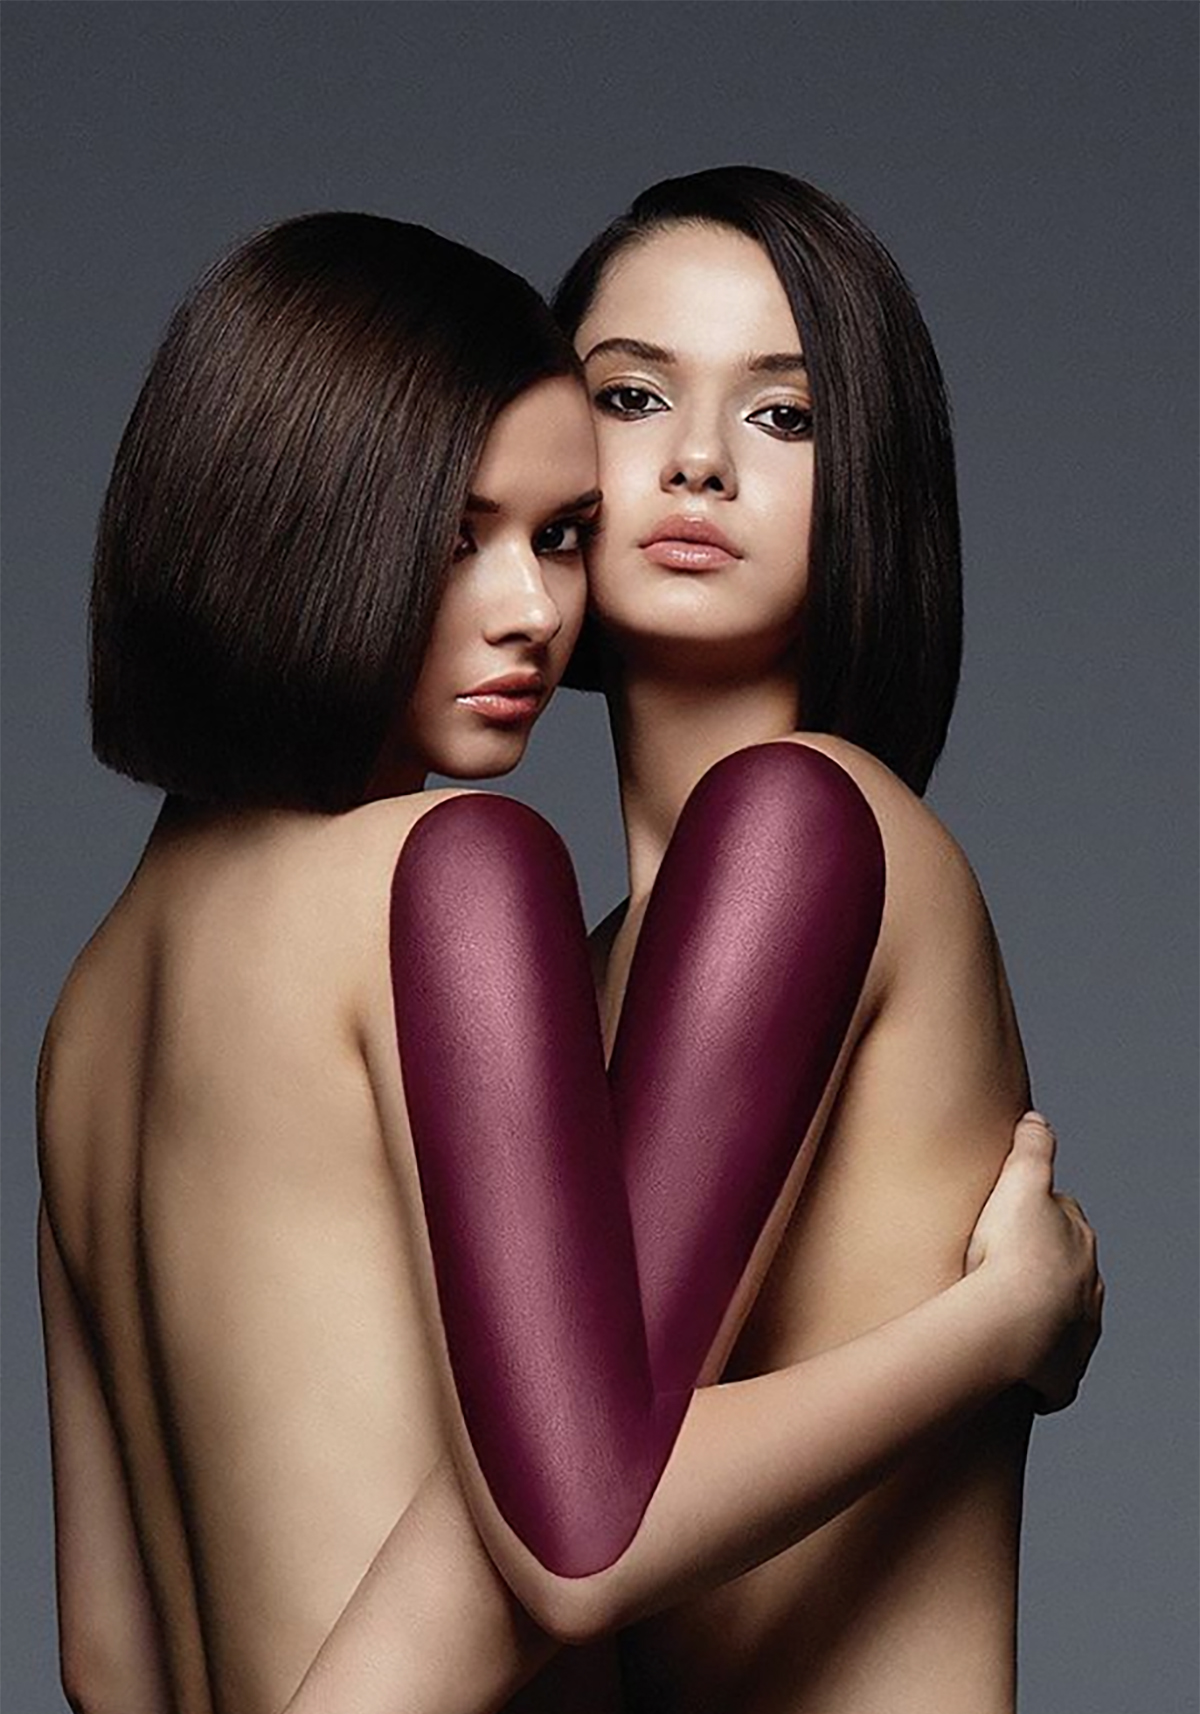 Twin models posing together